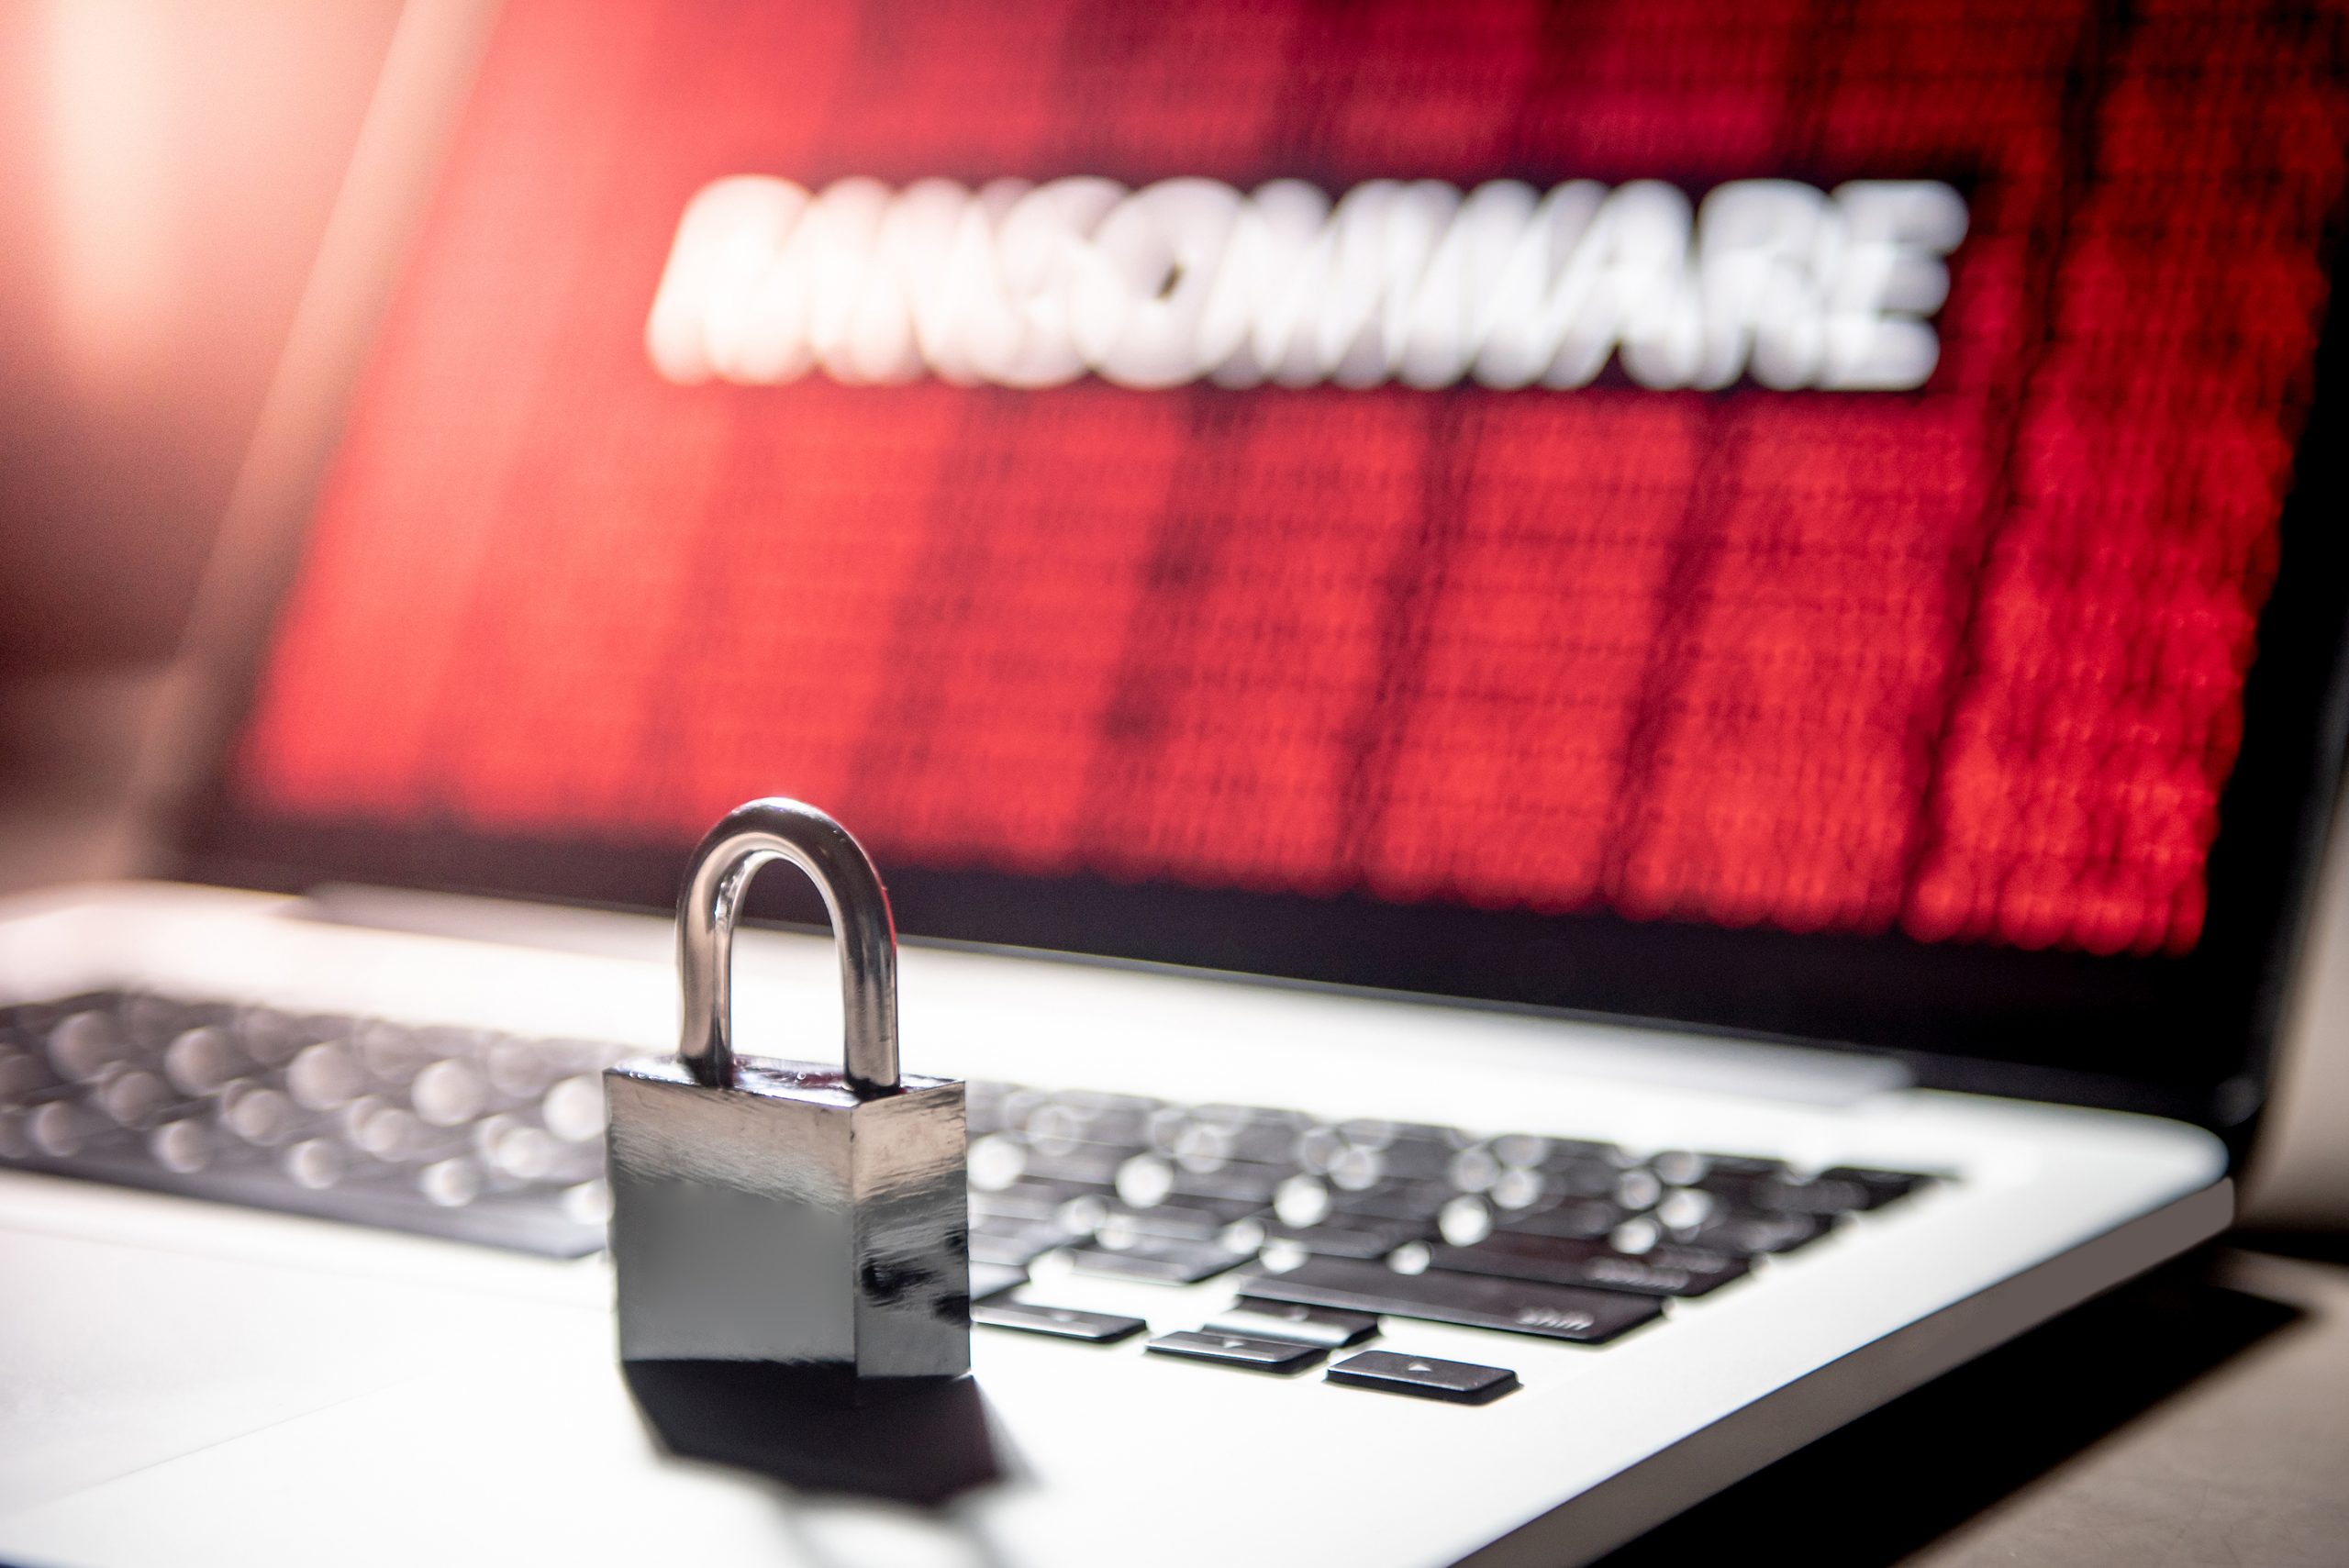 Important Steps to Take After You've Been Hit with Ransomware